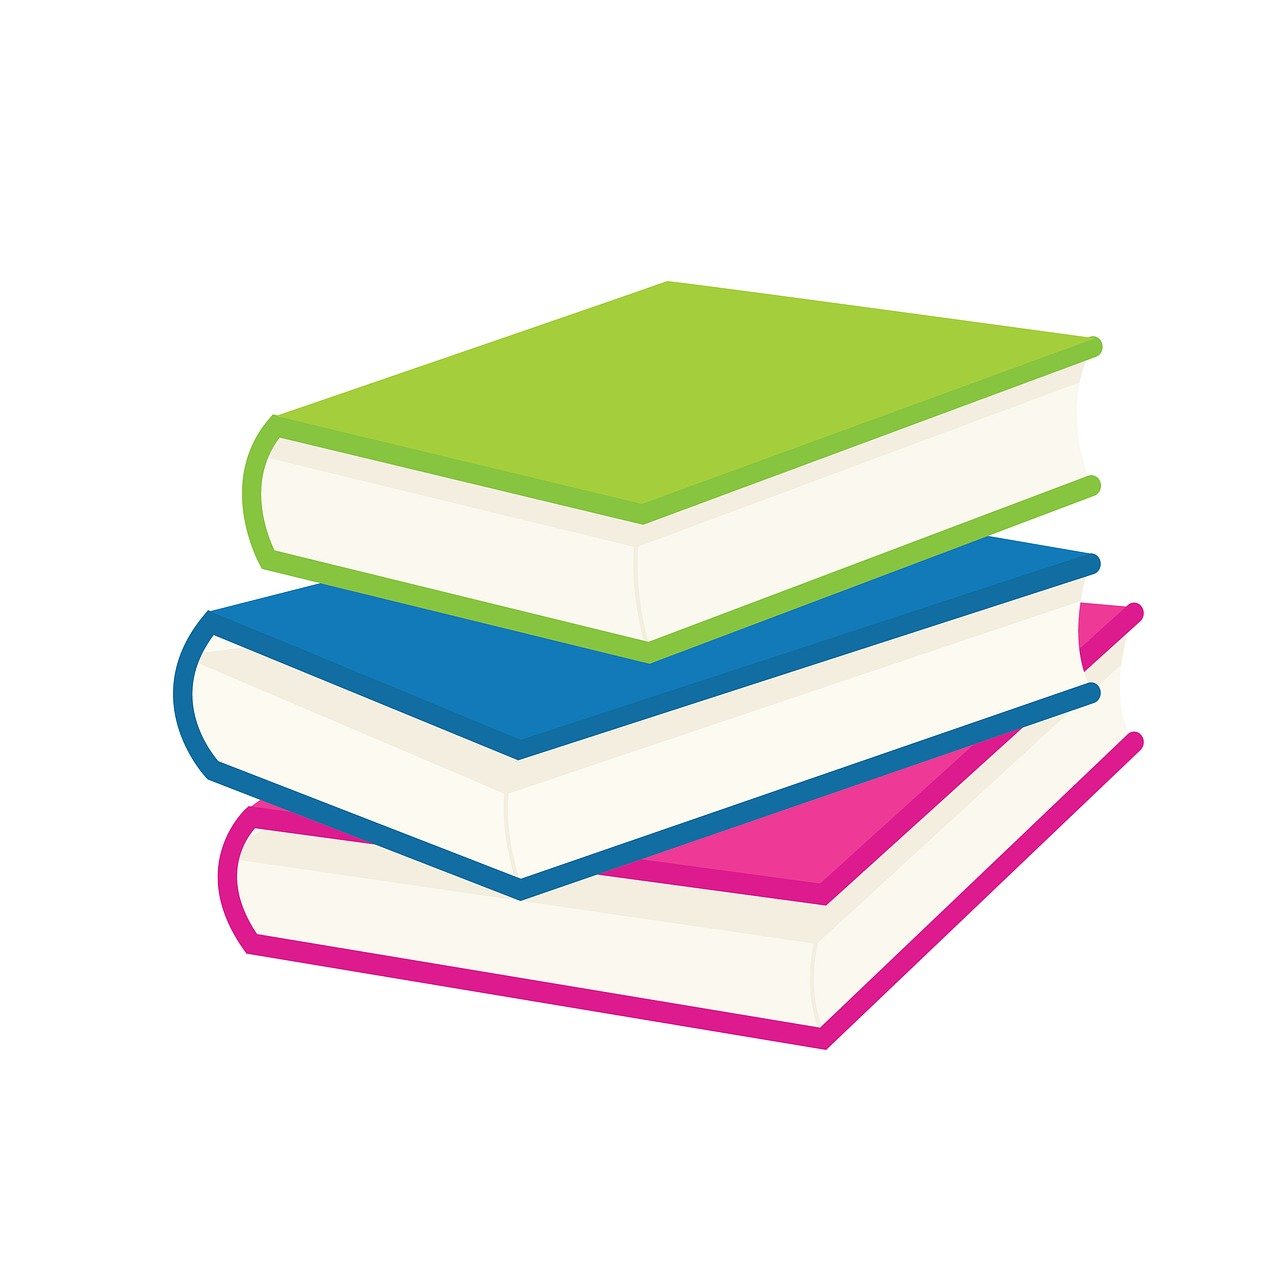 a stack of books sitting on top of each other, a storybook illustration, figuration libre, graphic illustration, full color illustration, blue and pink colors, simple and clean illustration